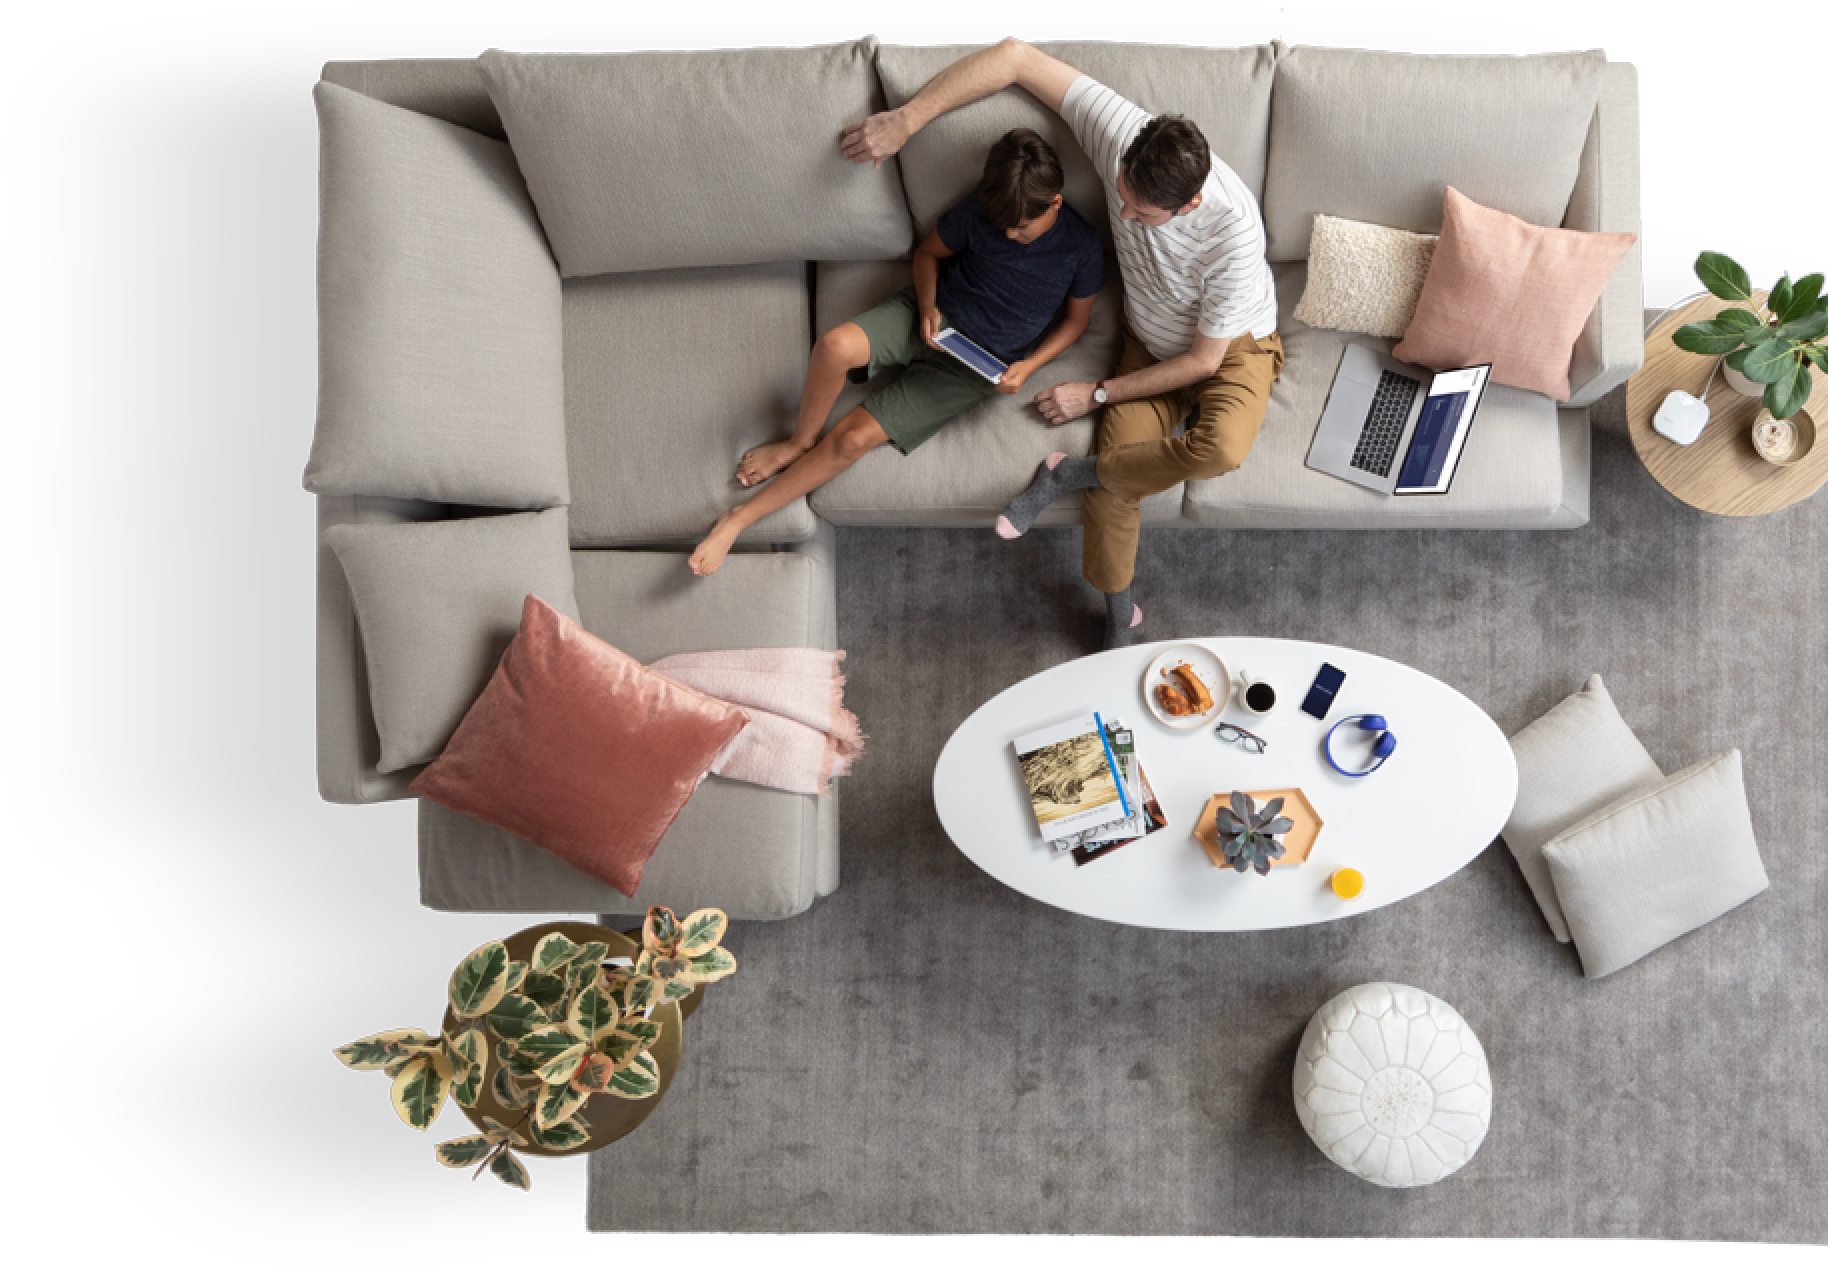 Couple in couch view from above